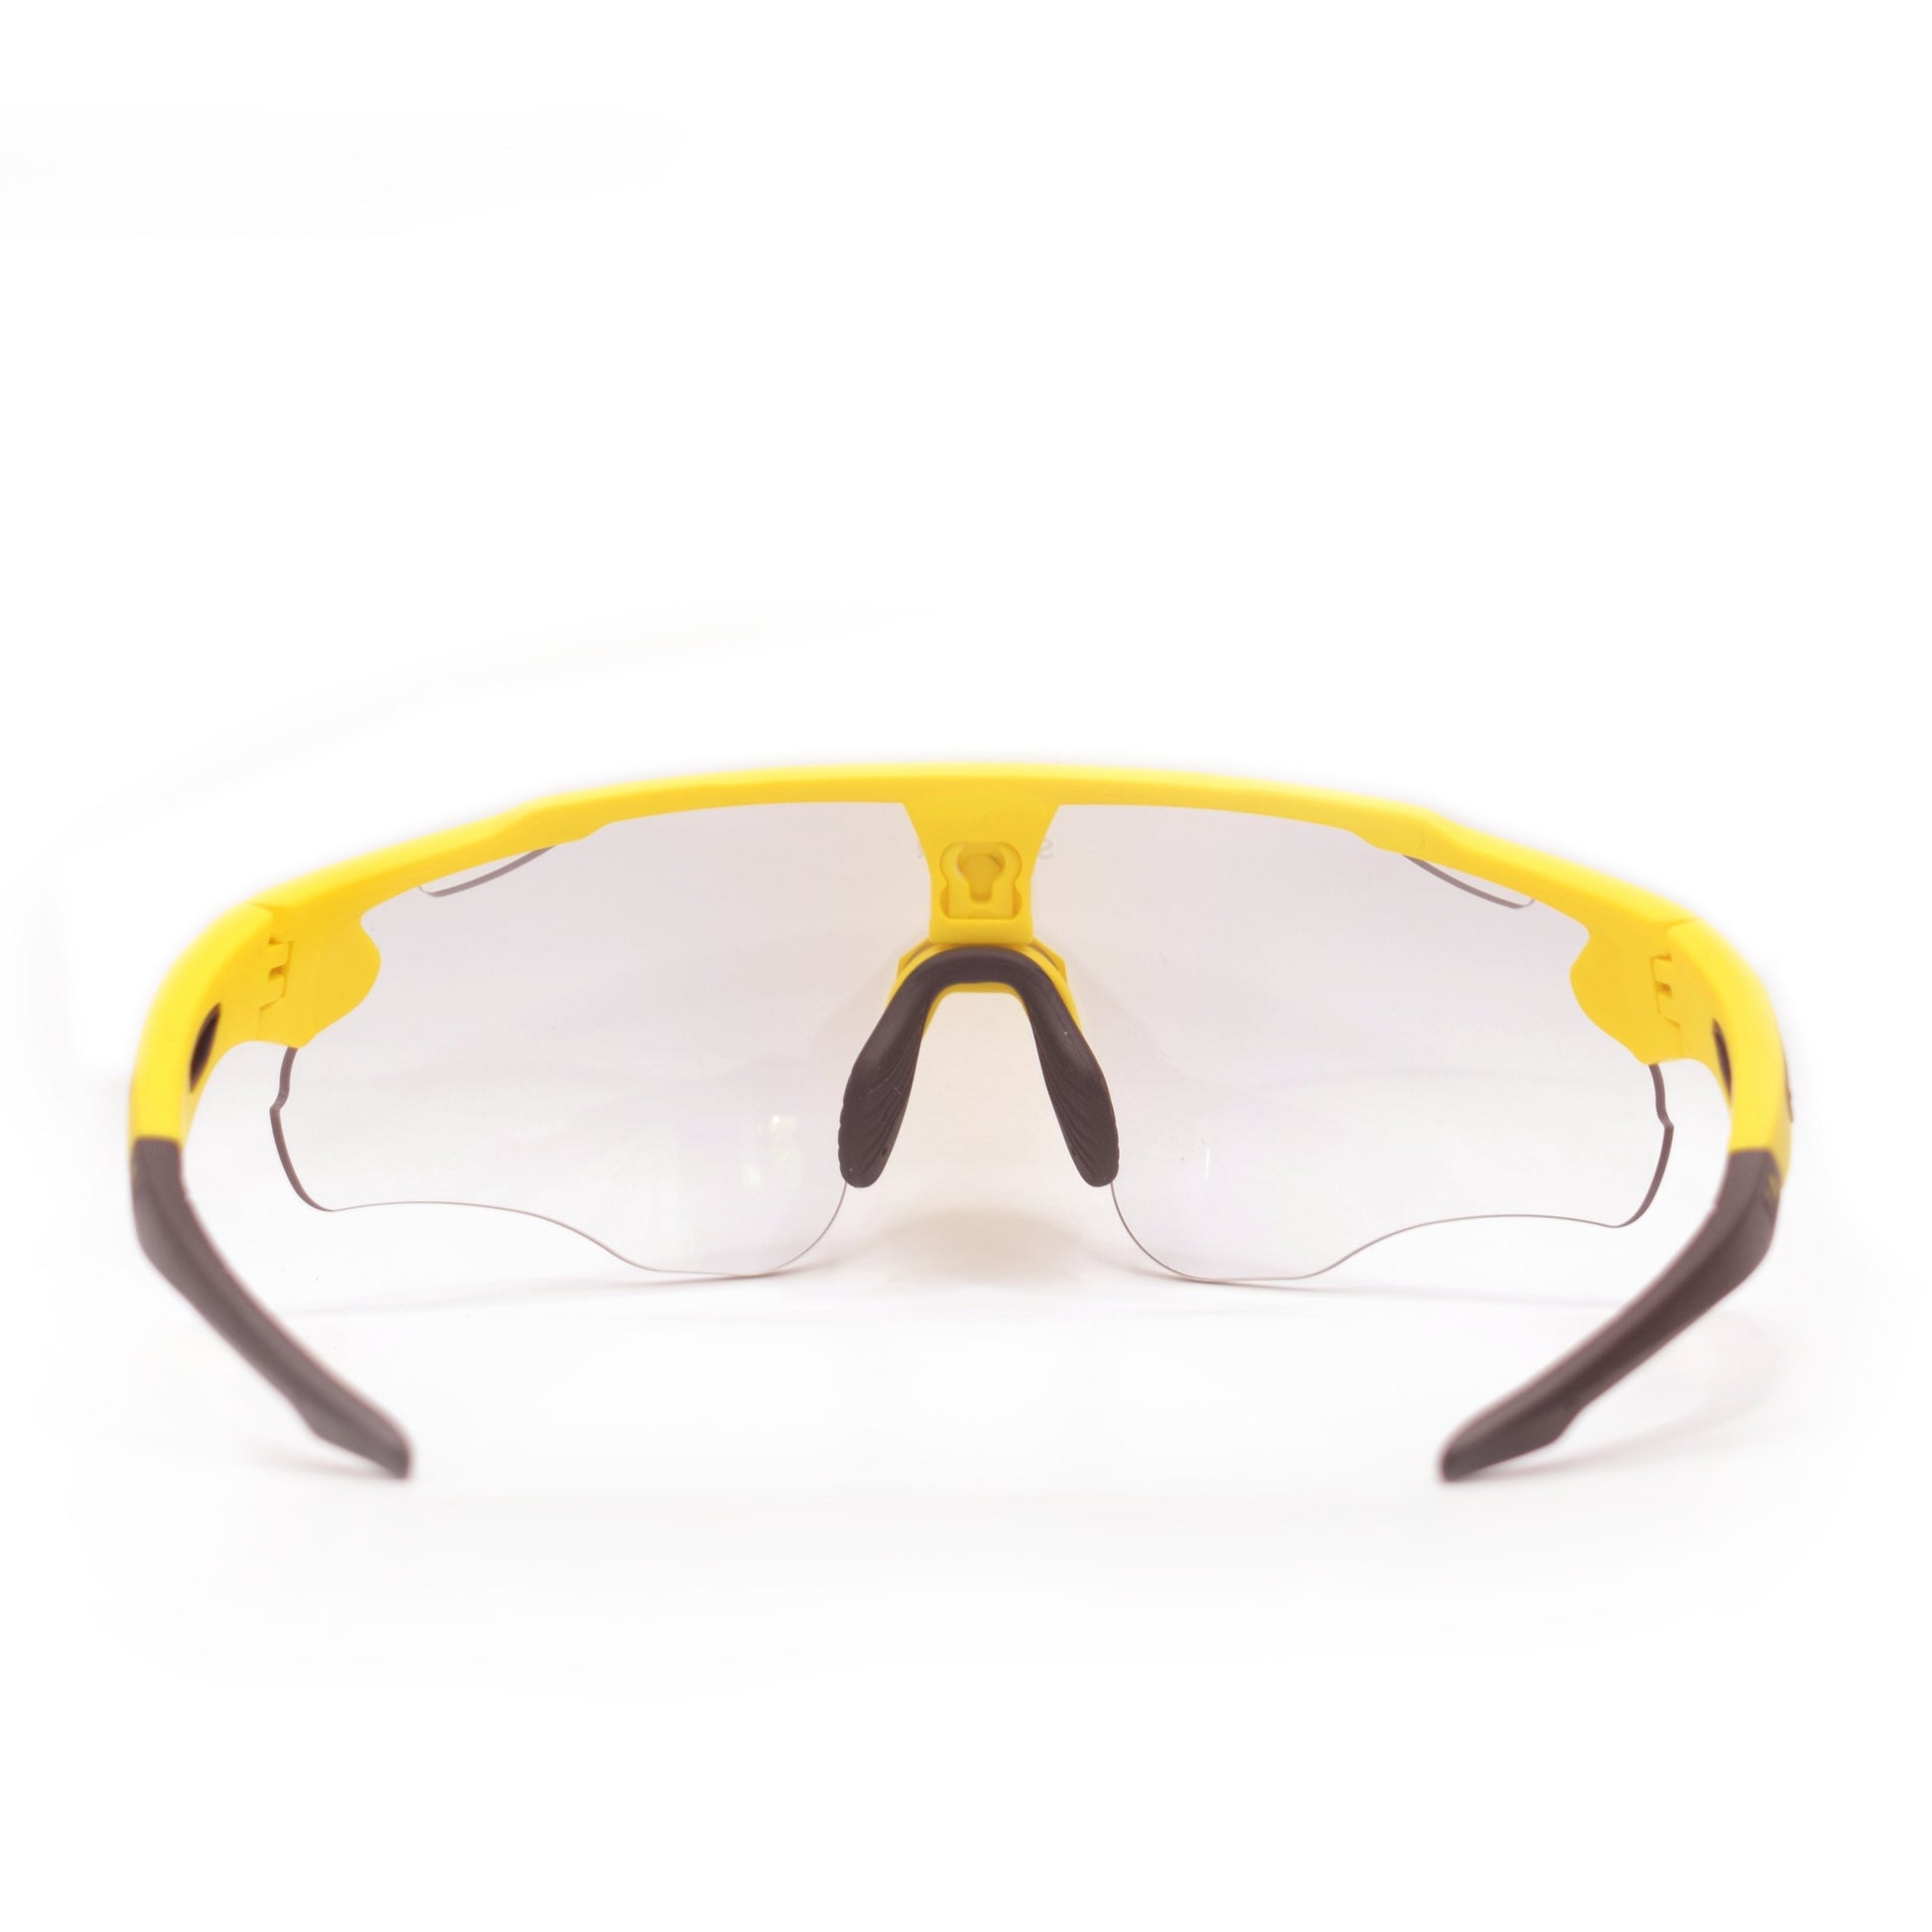 Helios Photochromic Cycling Glasses - Rear view